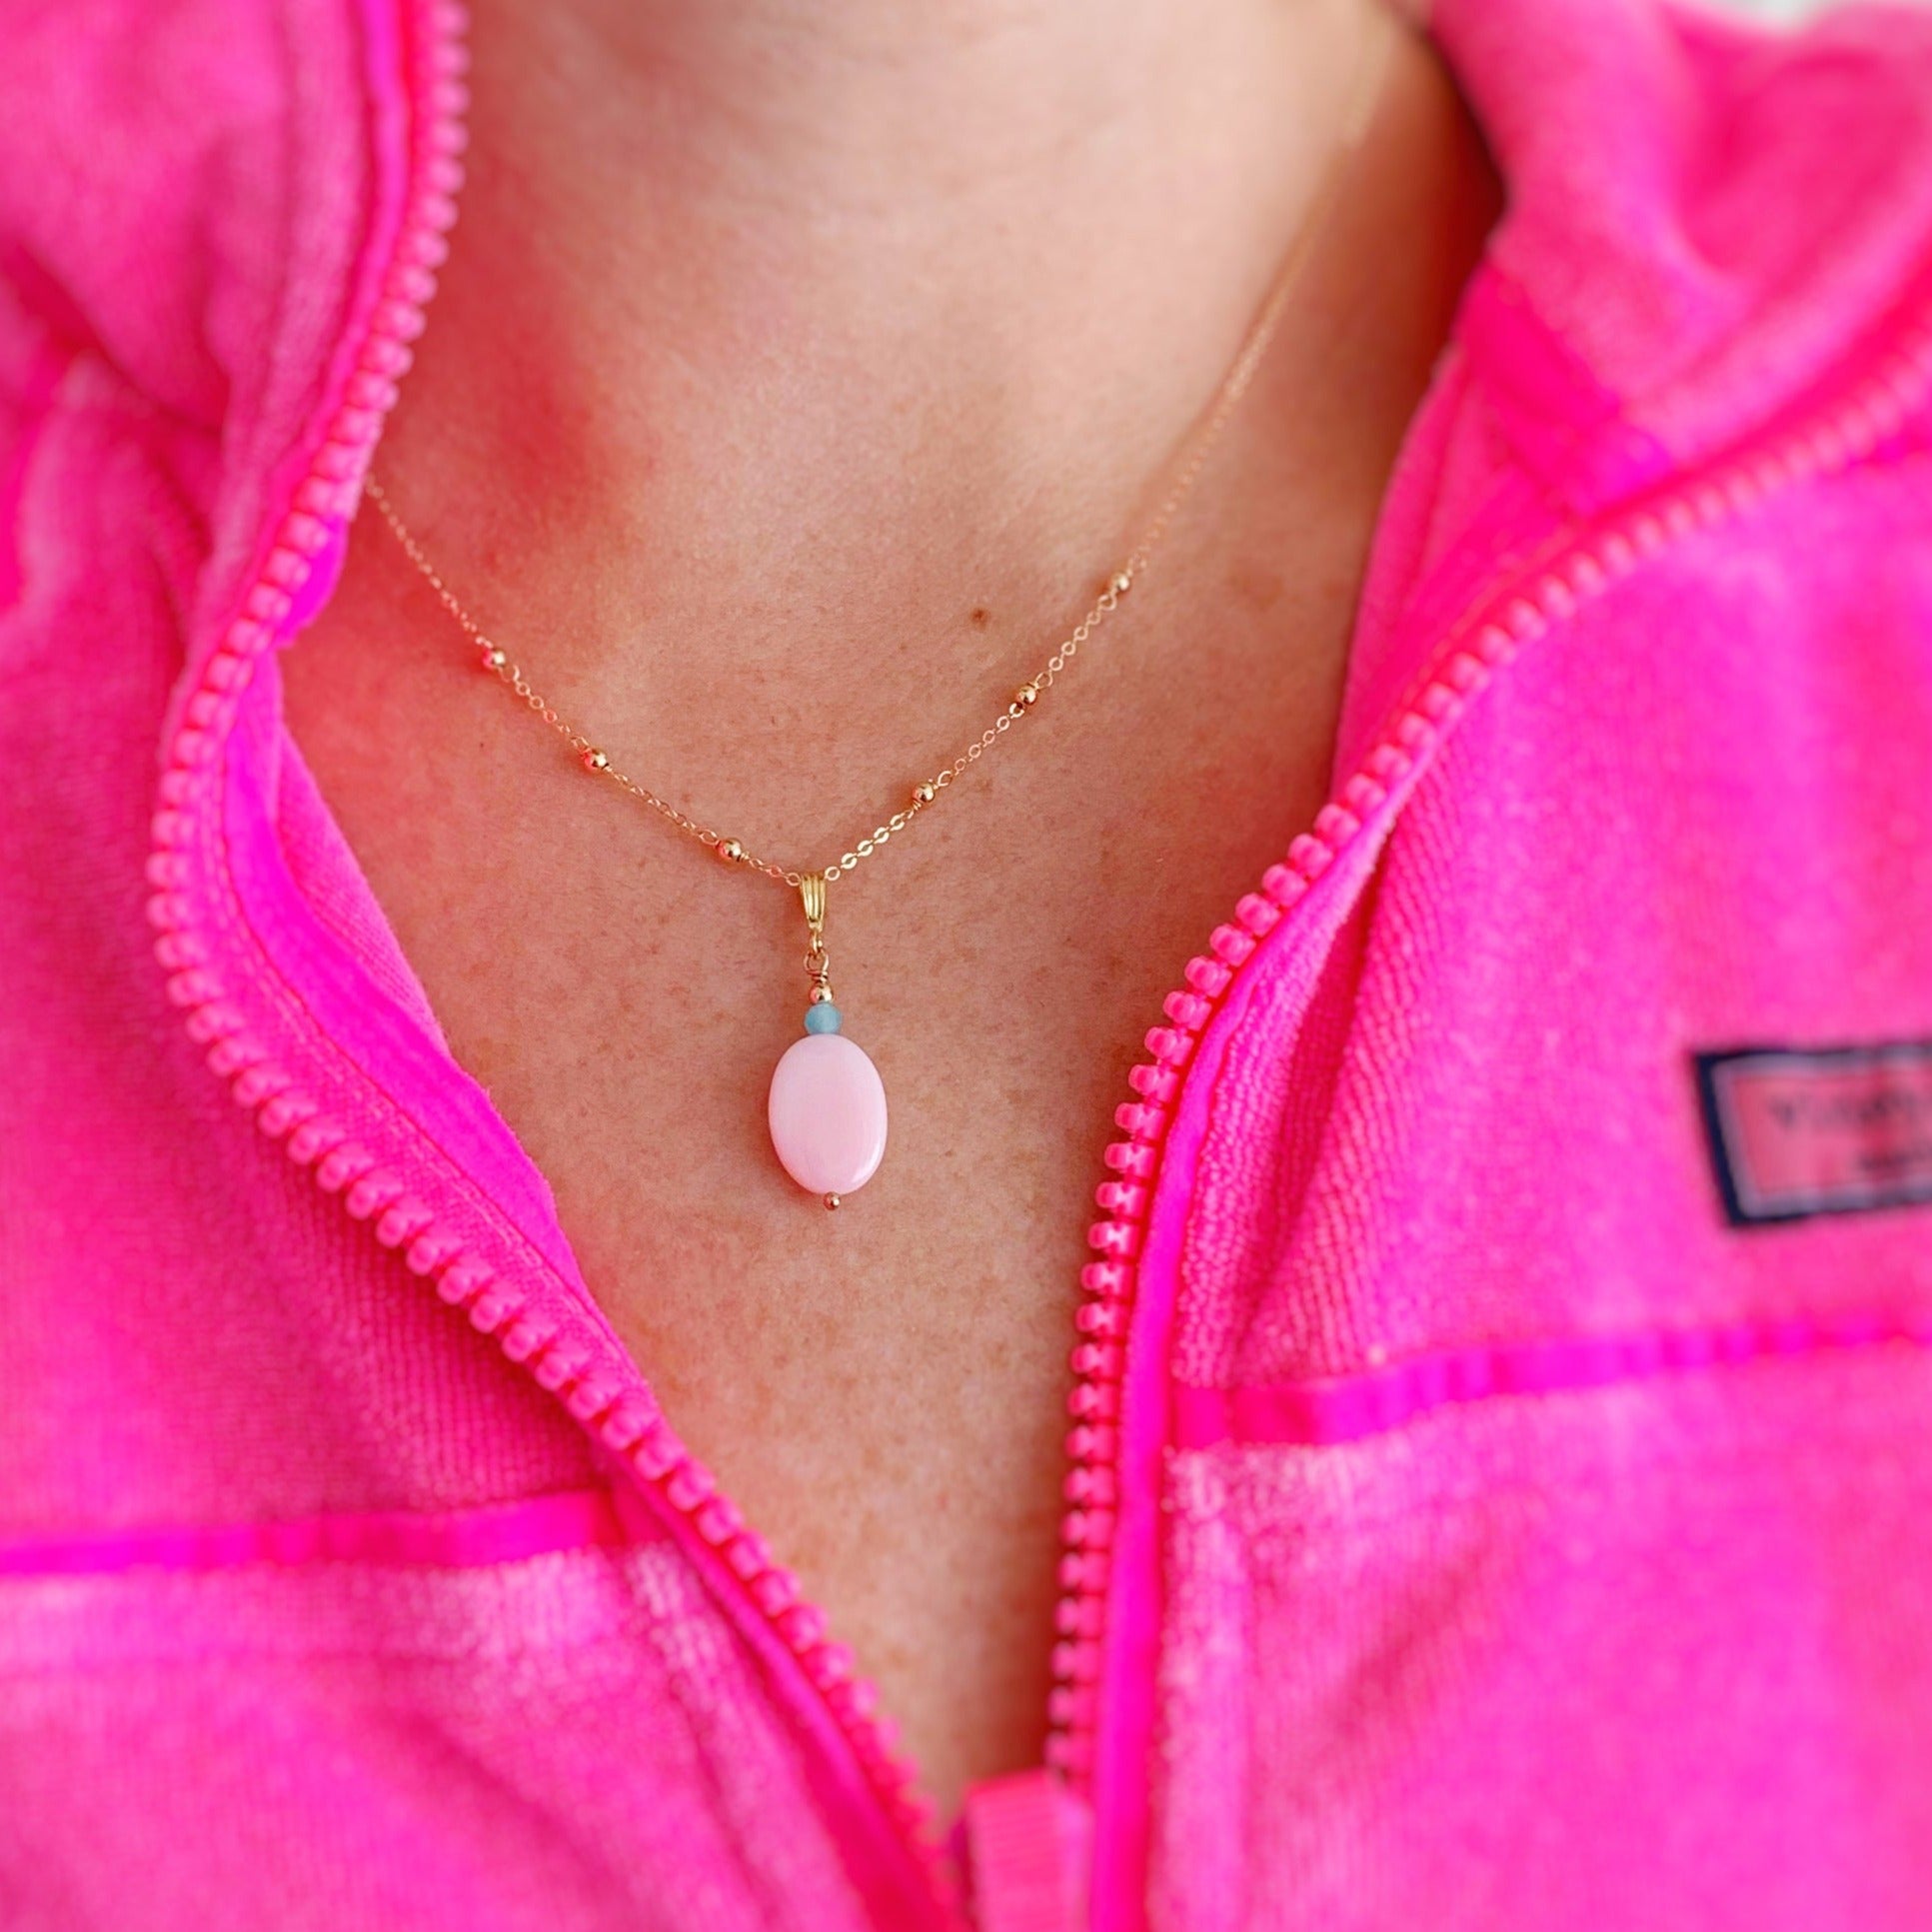 the sanibel necklace pictured on a person